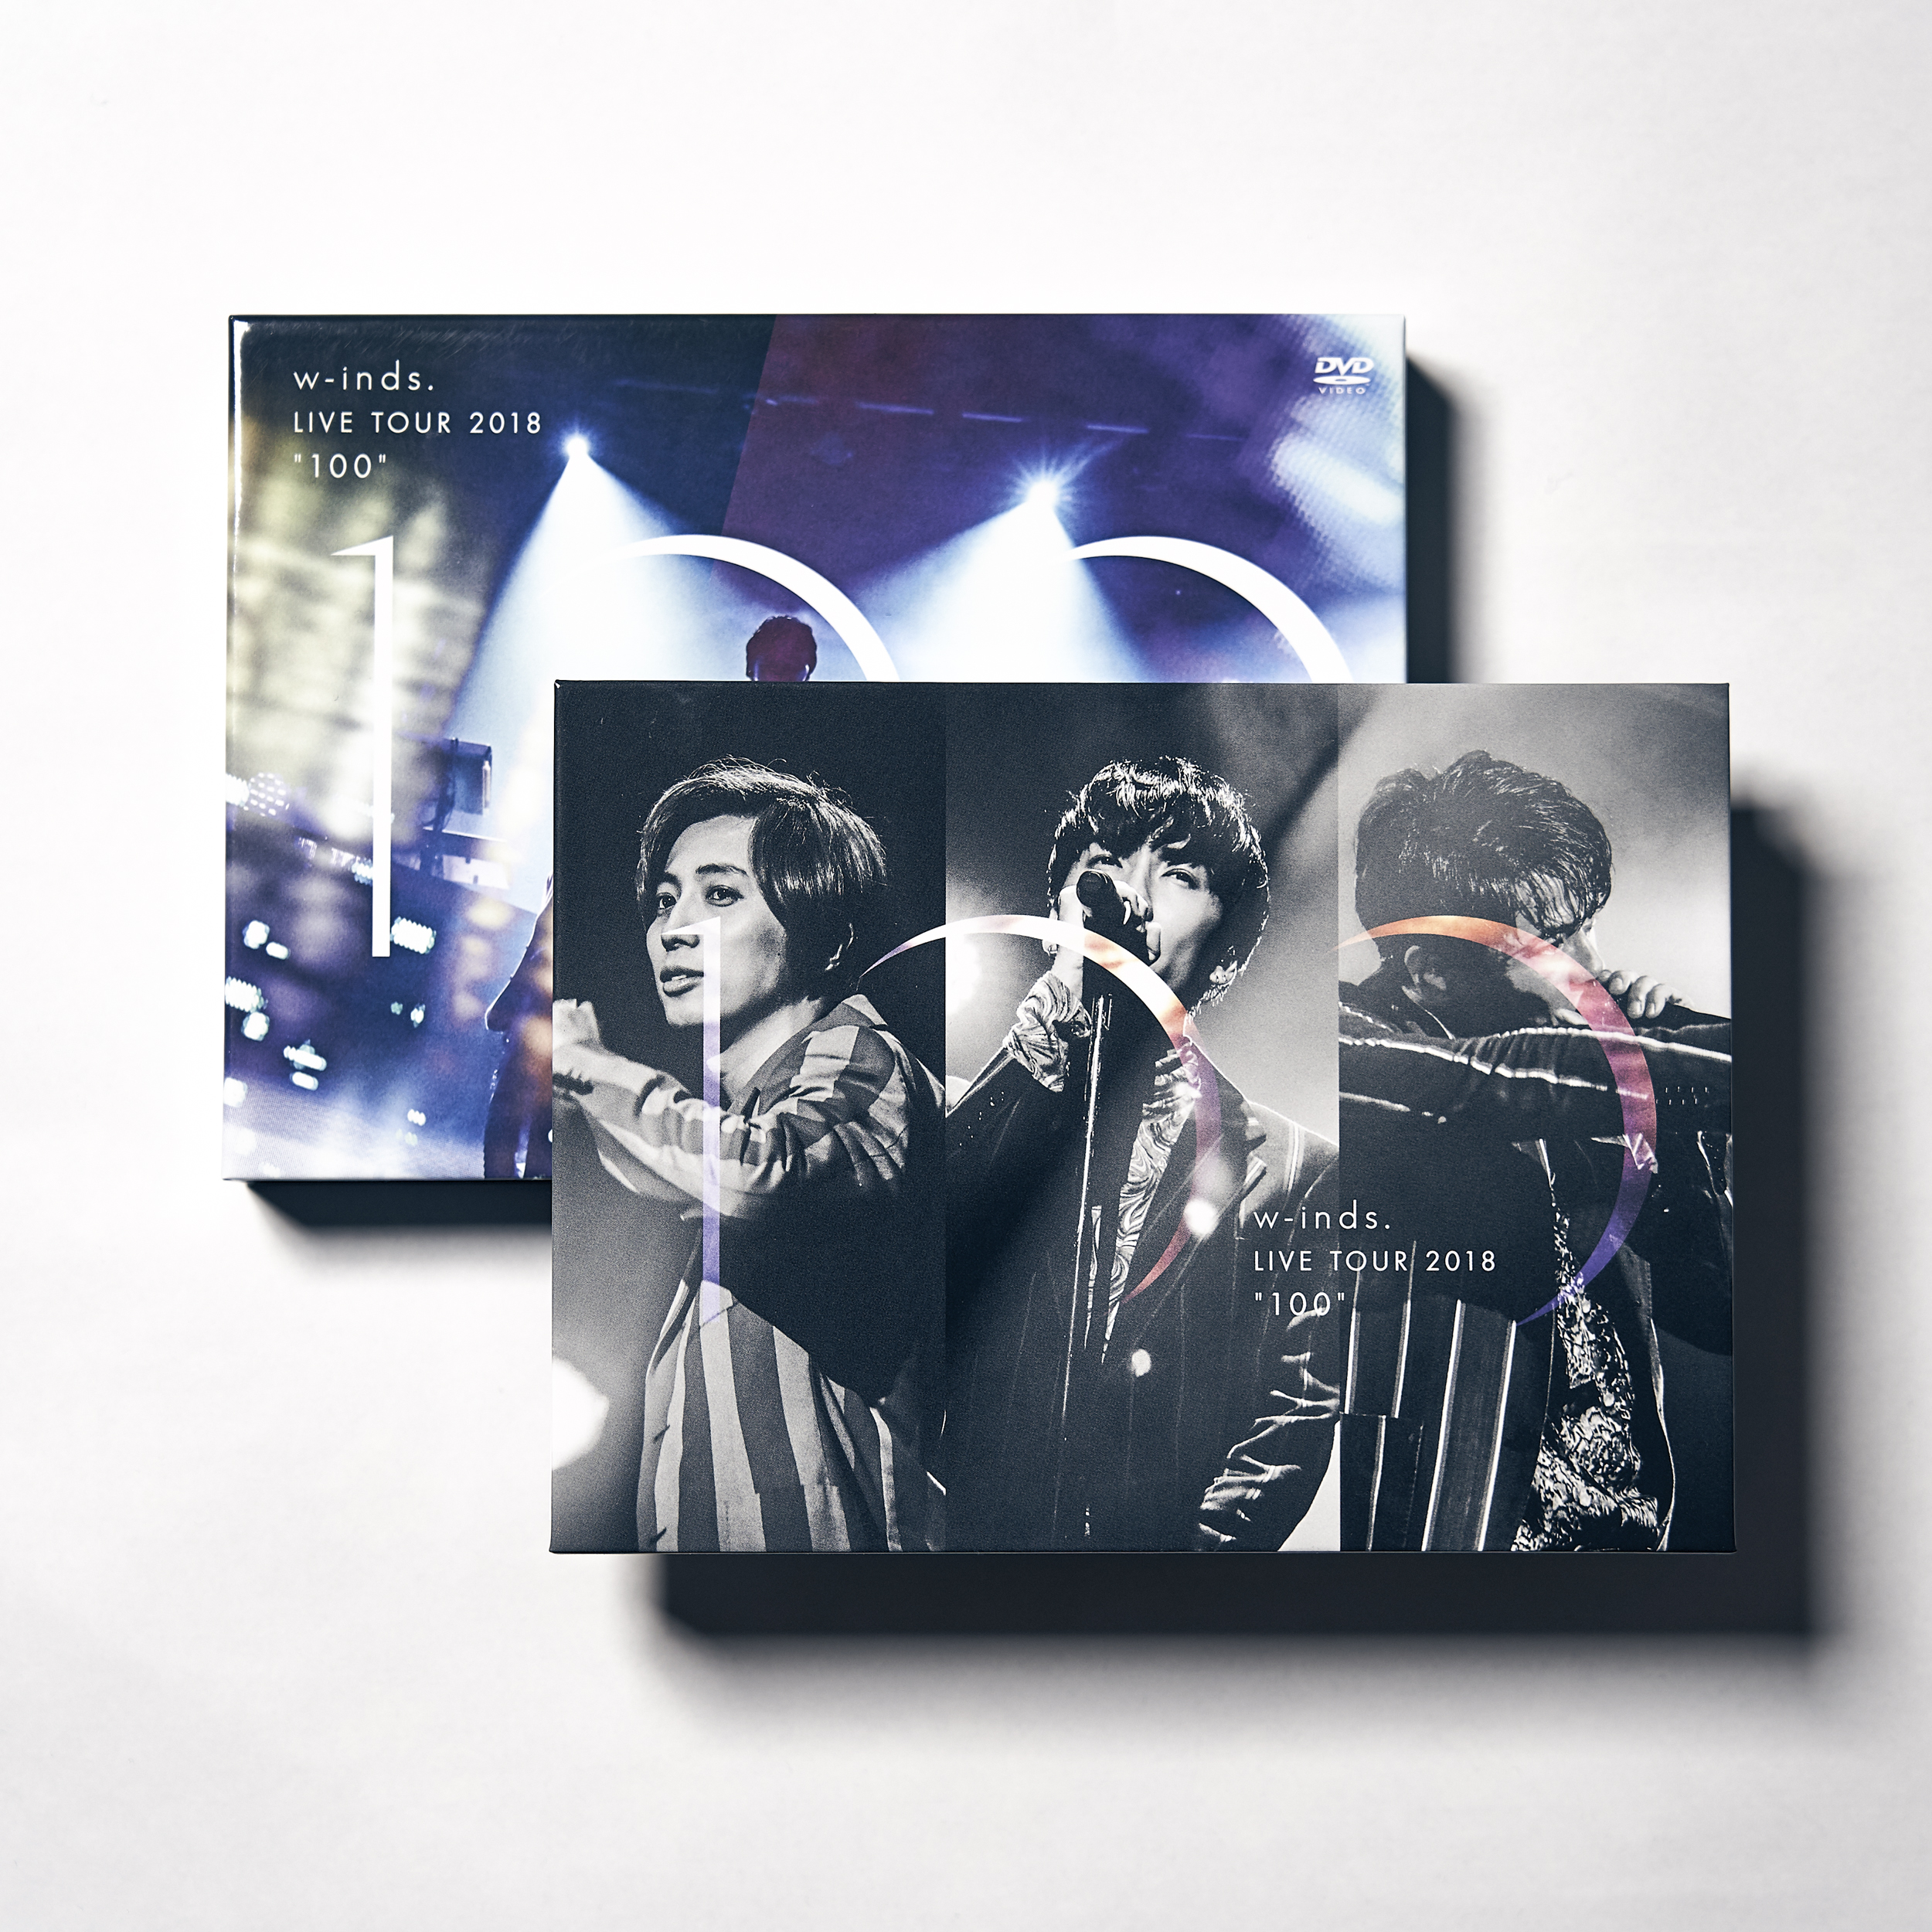 DVD w-inds. w-inds. LIVE TOUR 2022 ”We are” PCBP-55593 - CD